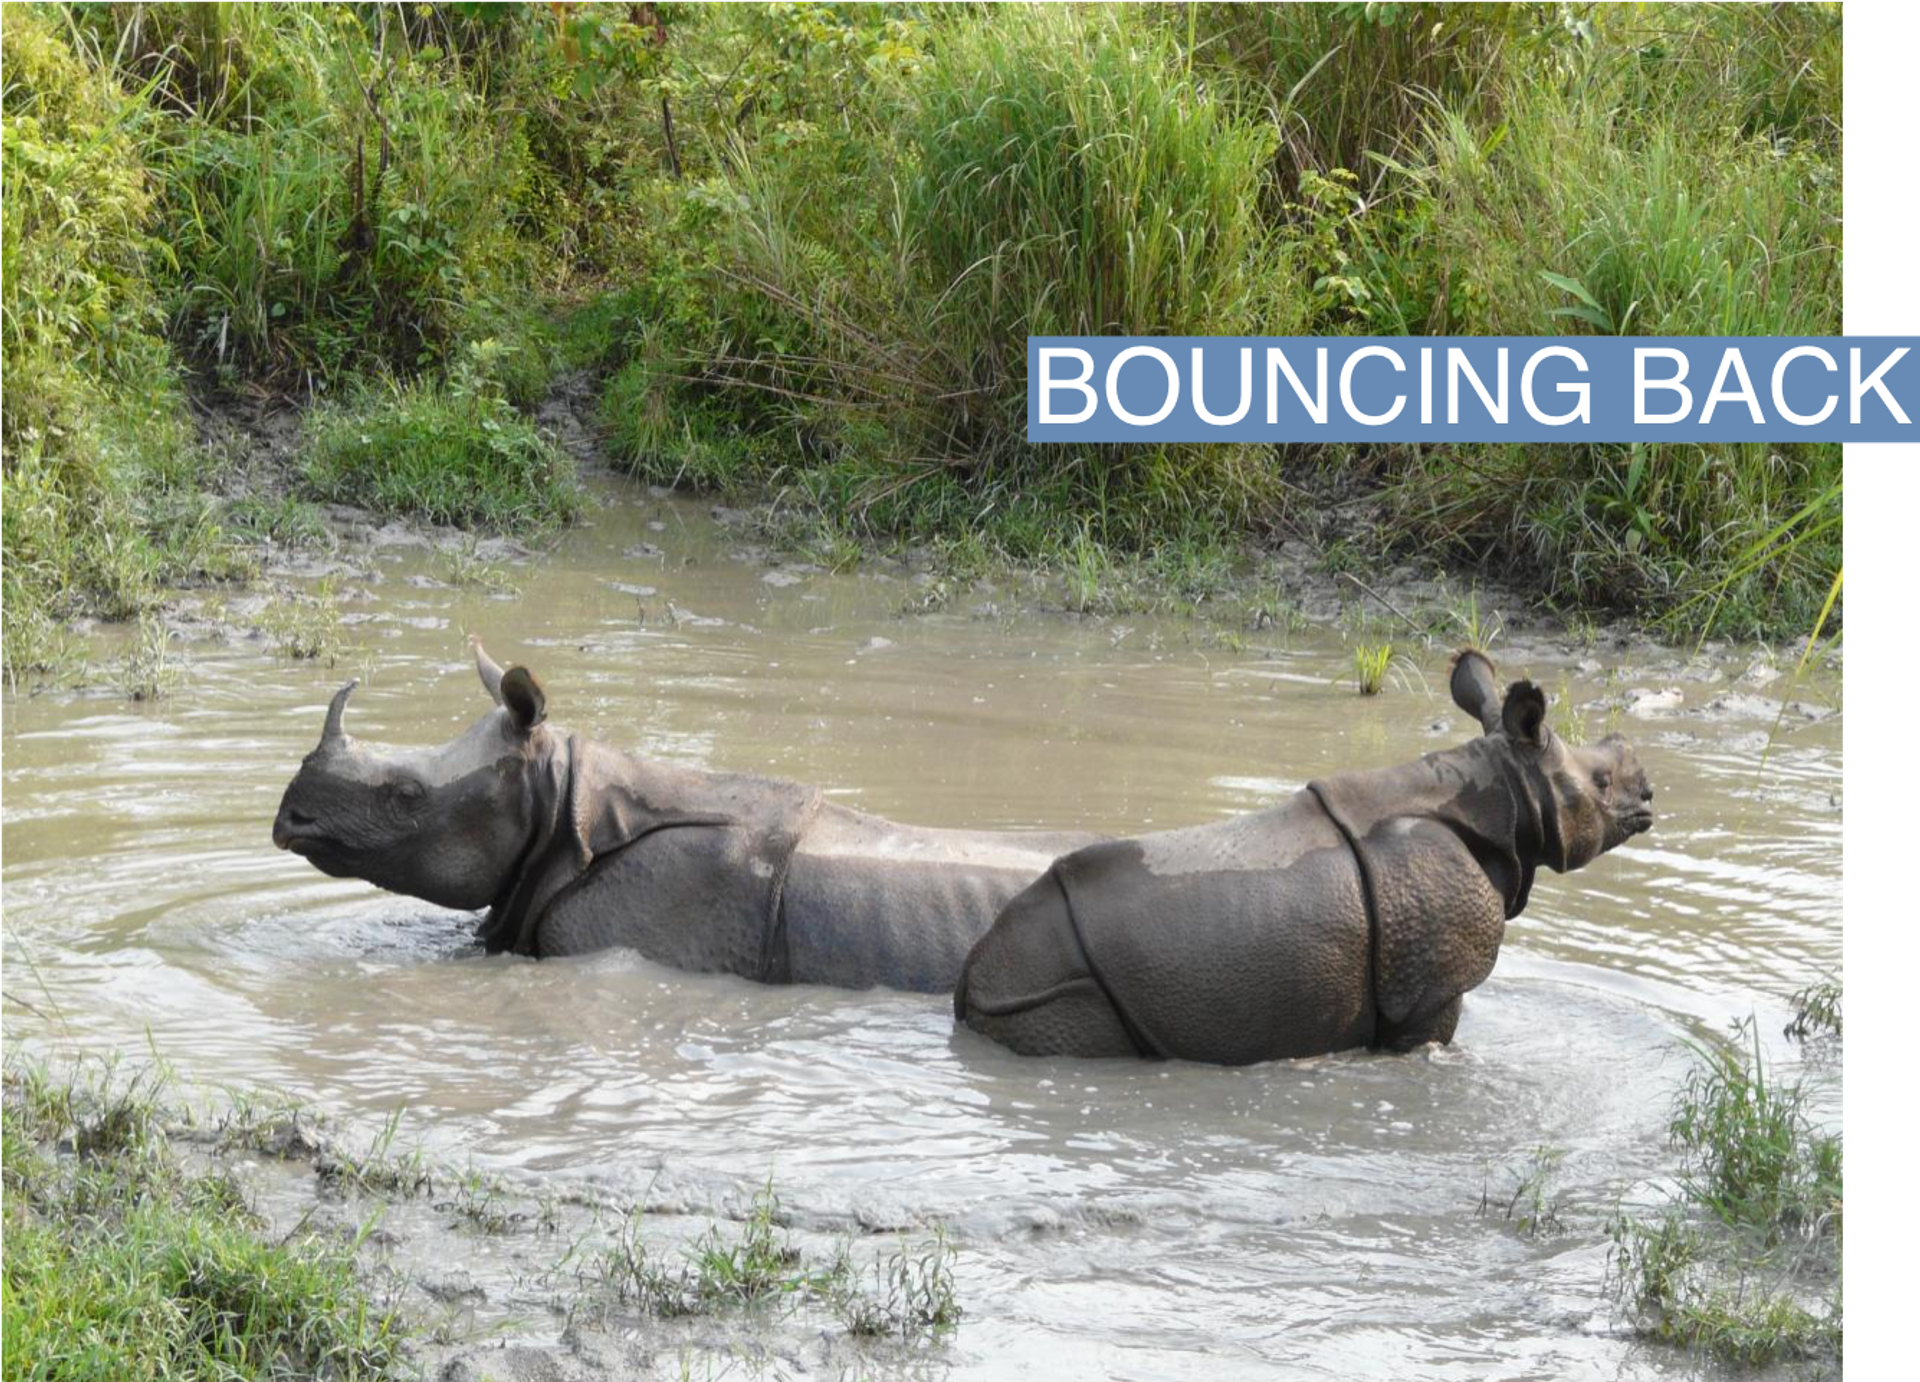 A mother rhino and her calf wallowing at the Jaldapara Wildlife Sanctuary in Assam, India